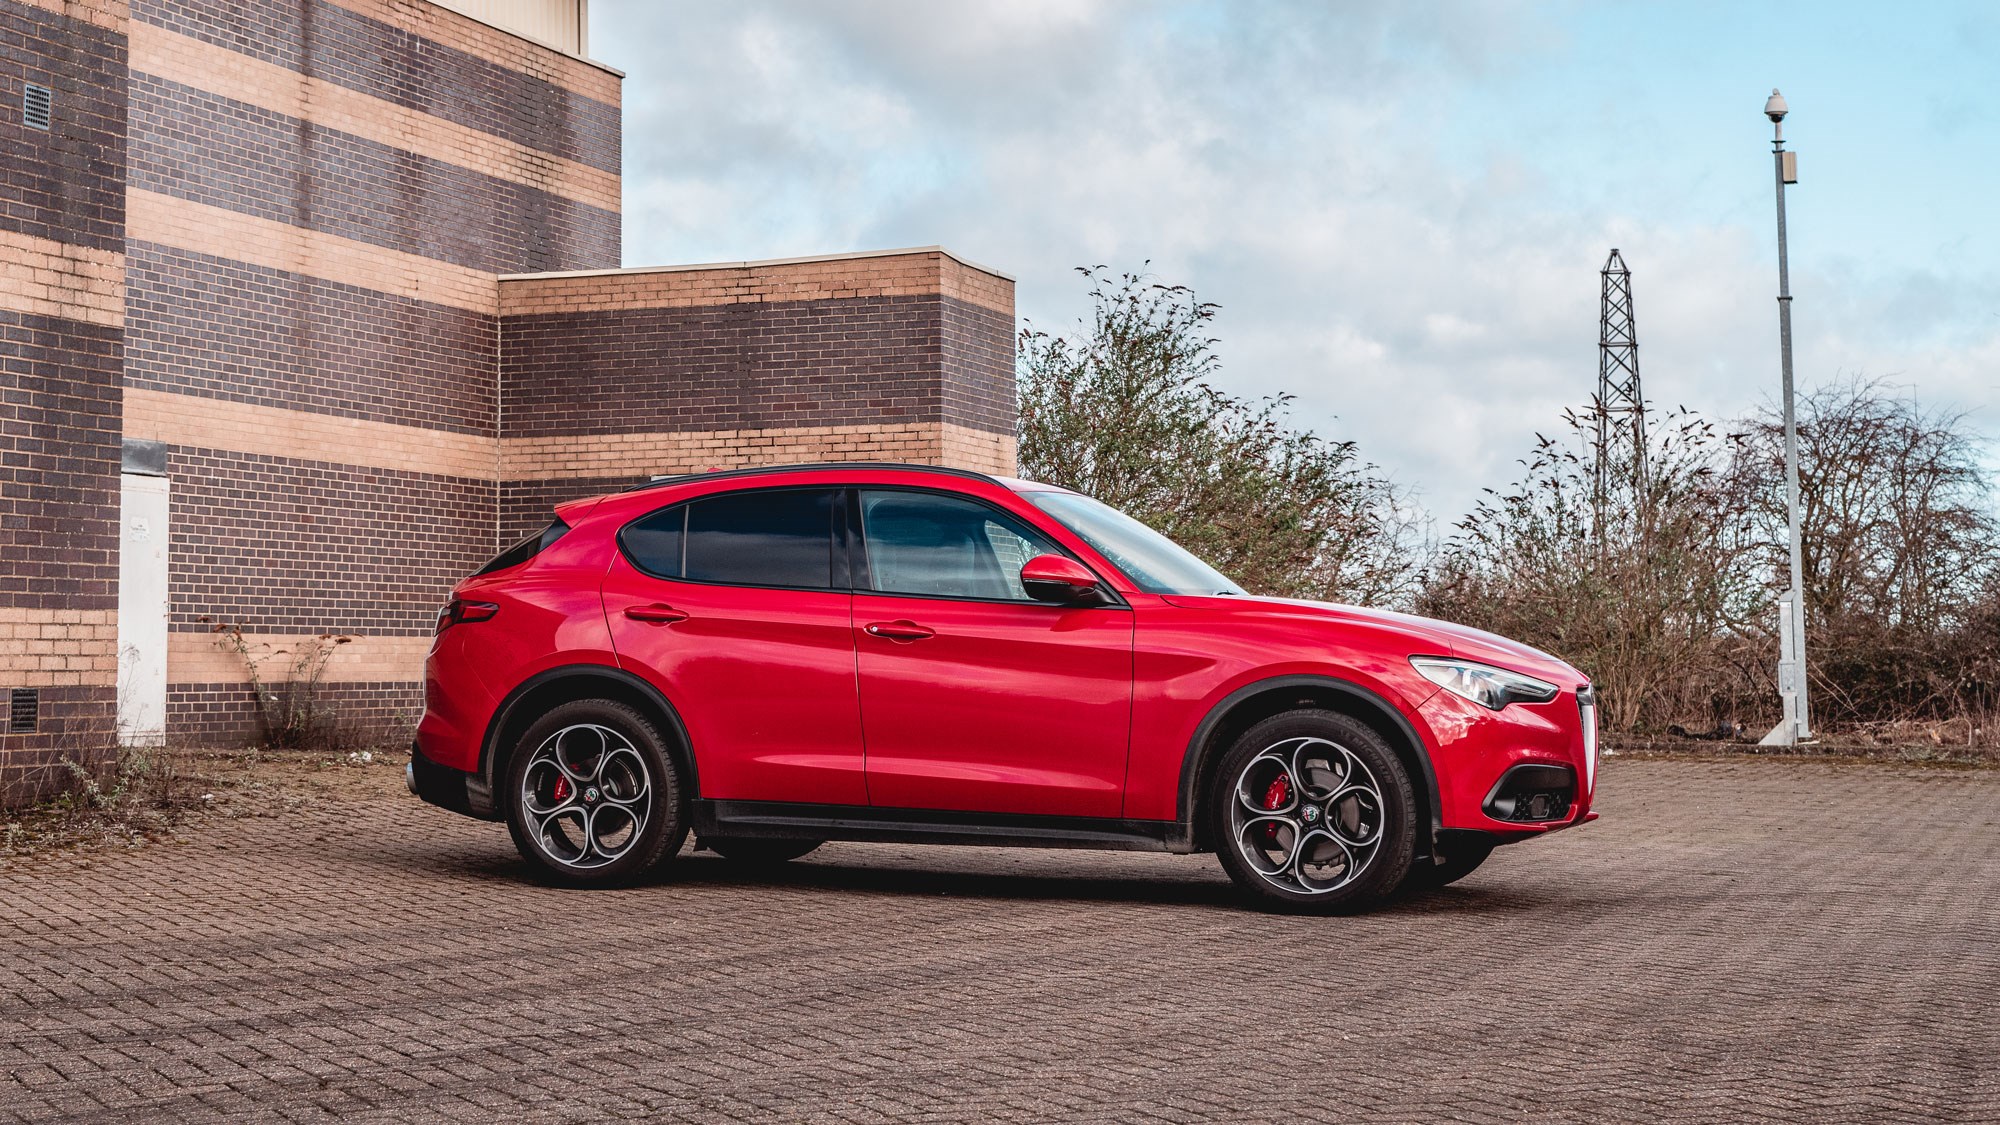 Alfa Romeo Stelvio UK prices, specs and what it's like to live with